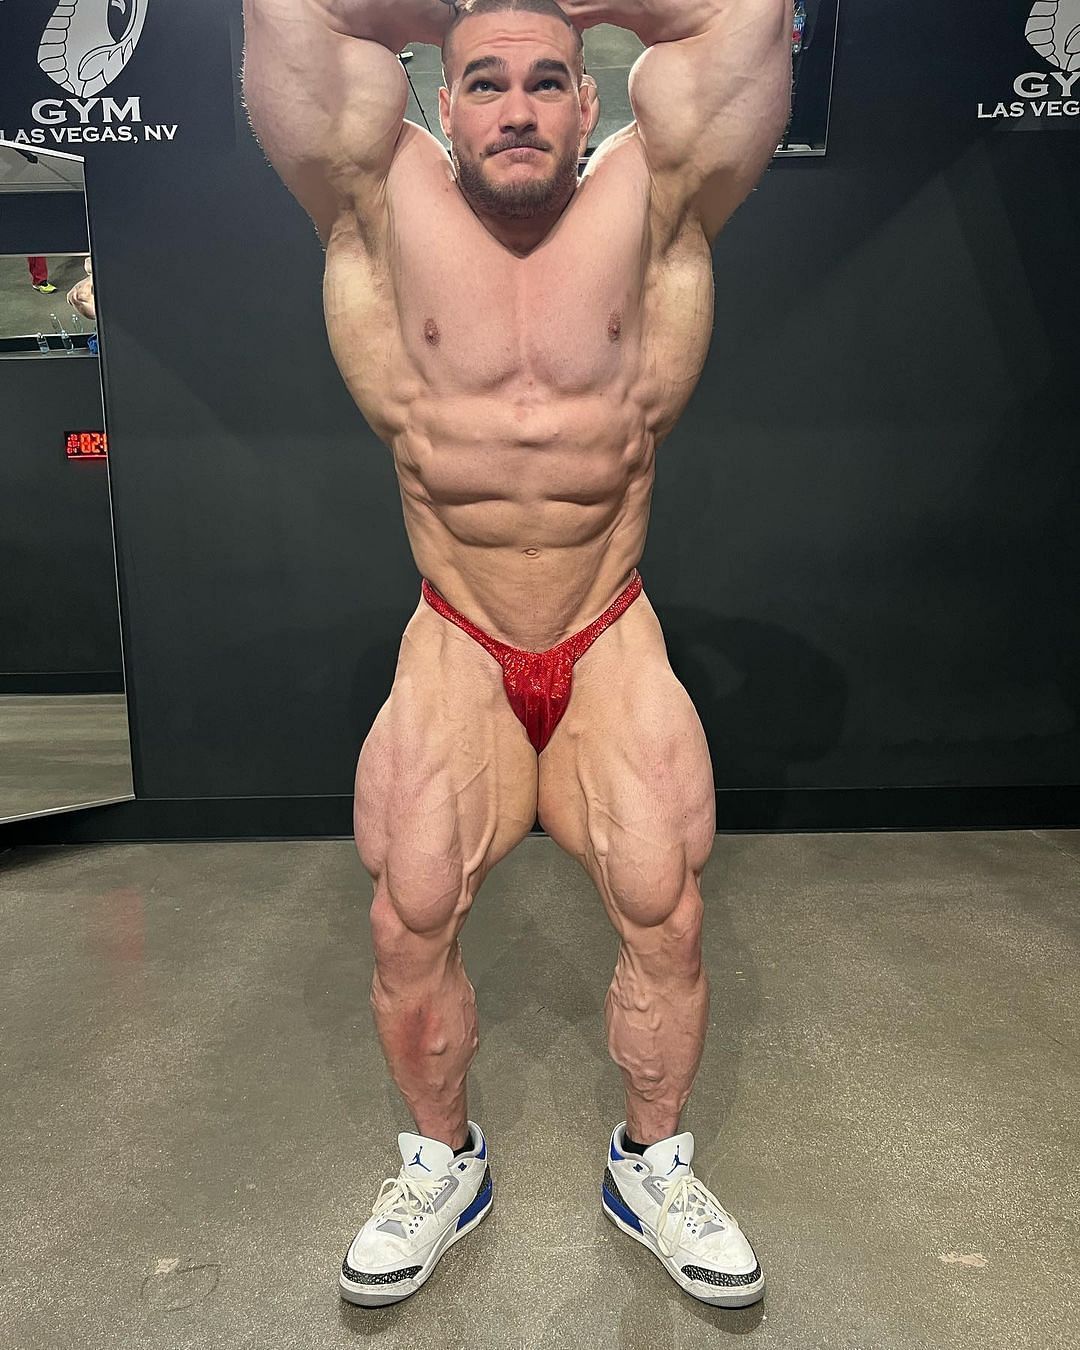 Walker shows off his exceptional physique ahead of the 2023 Arnold Classic (Image via Instagram/@nick_walker39)